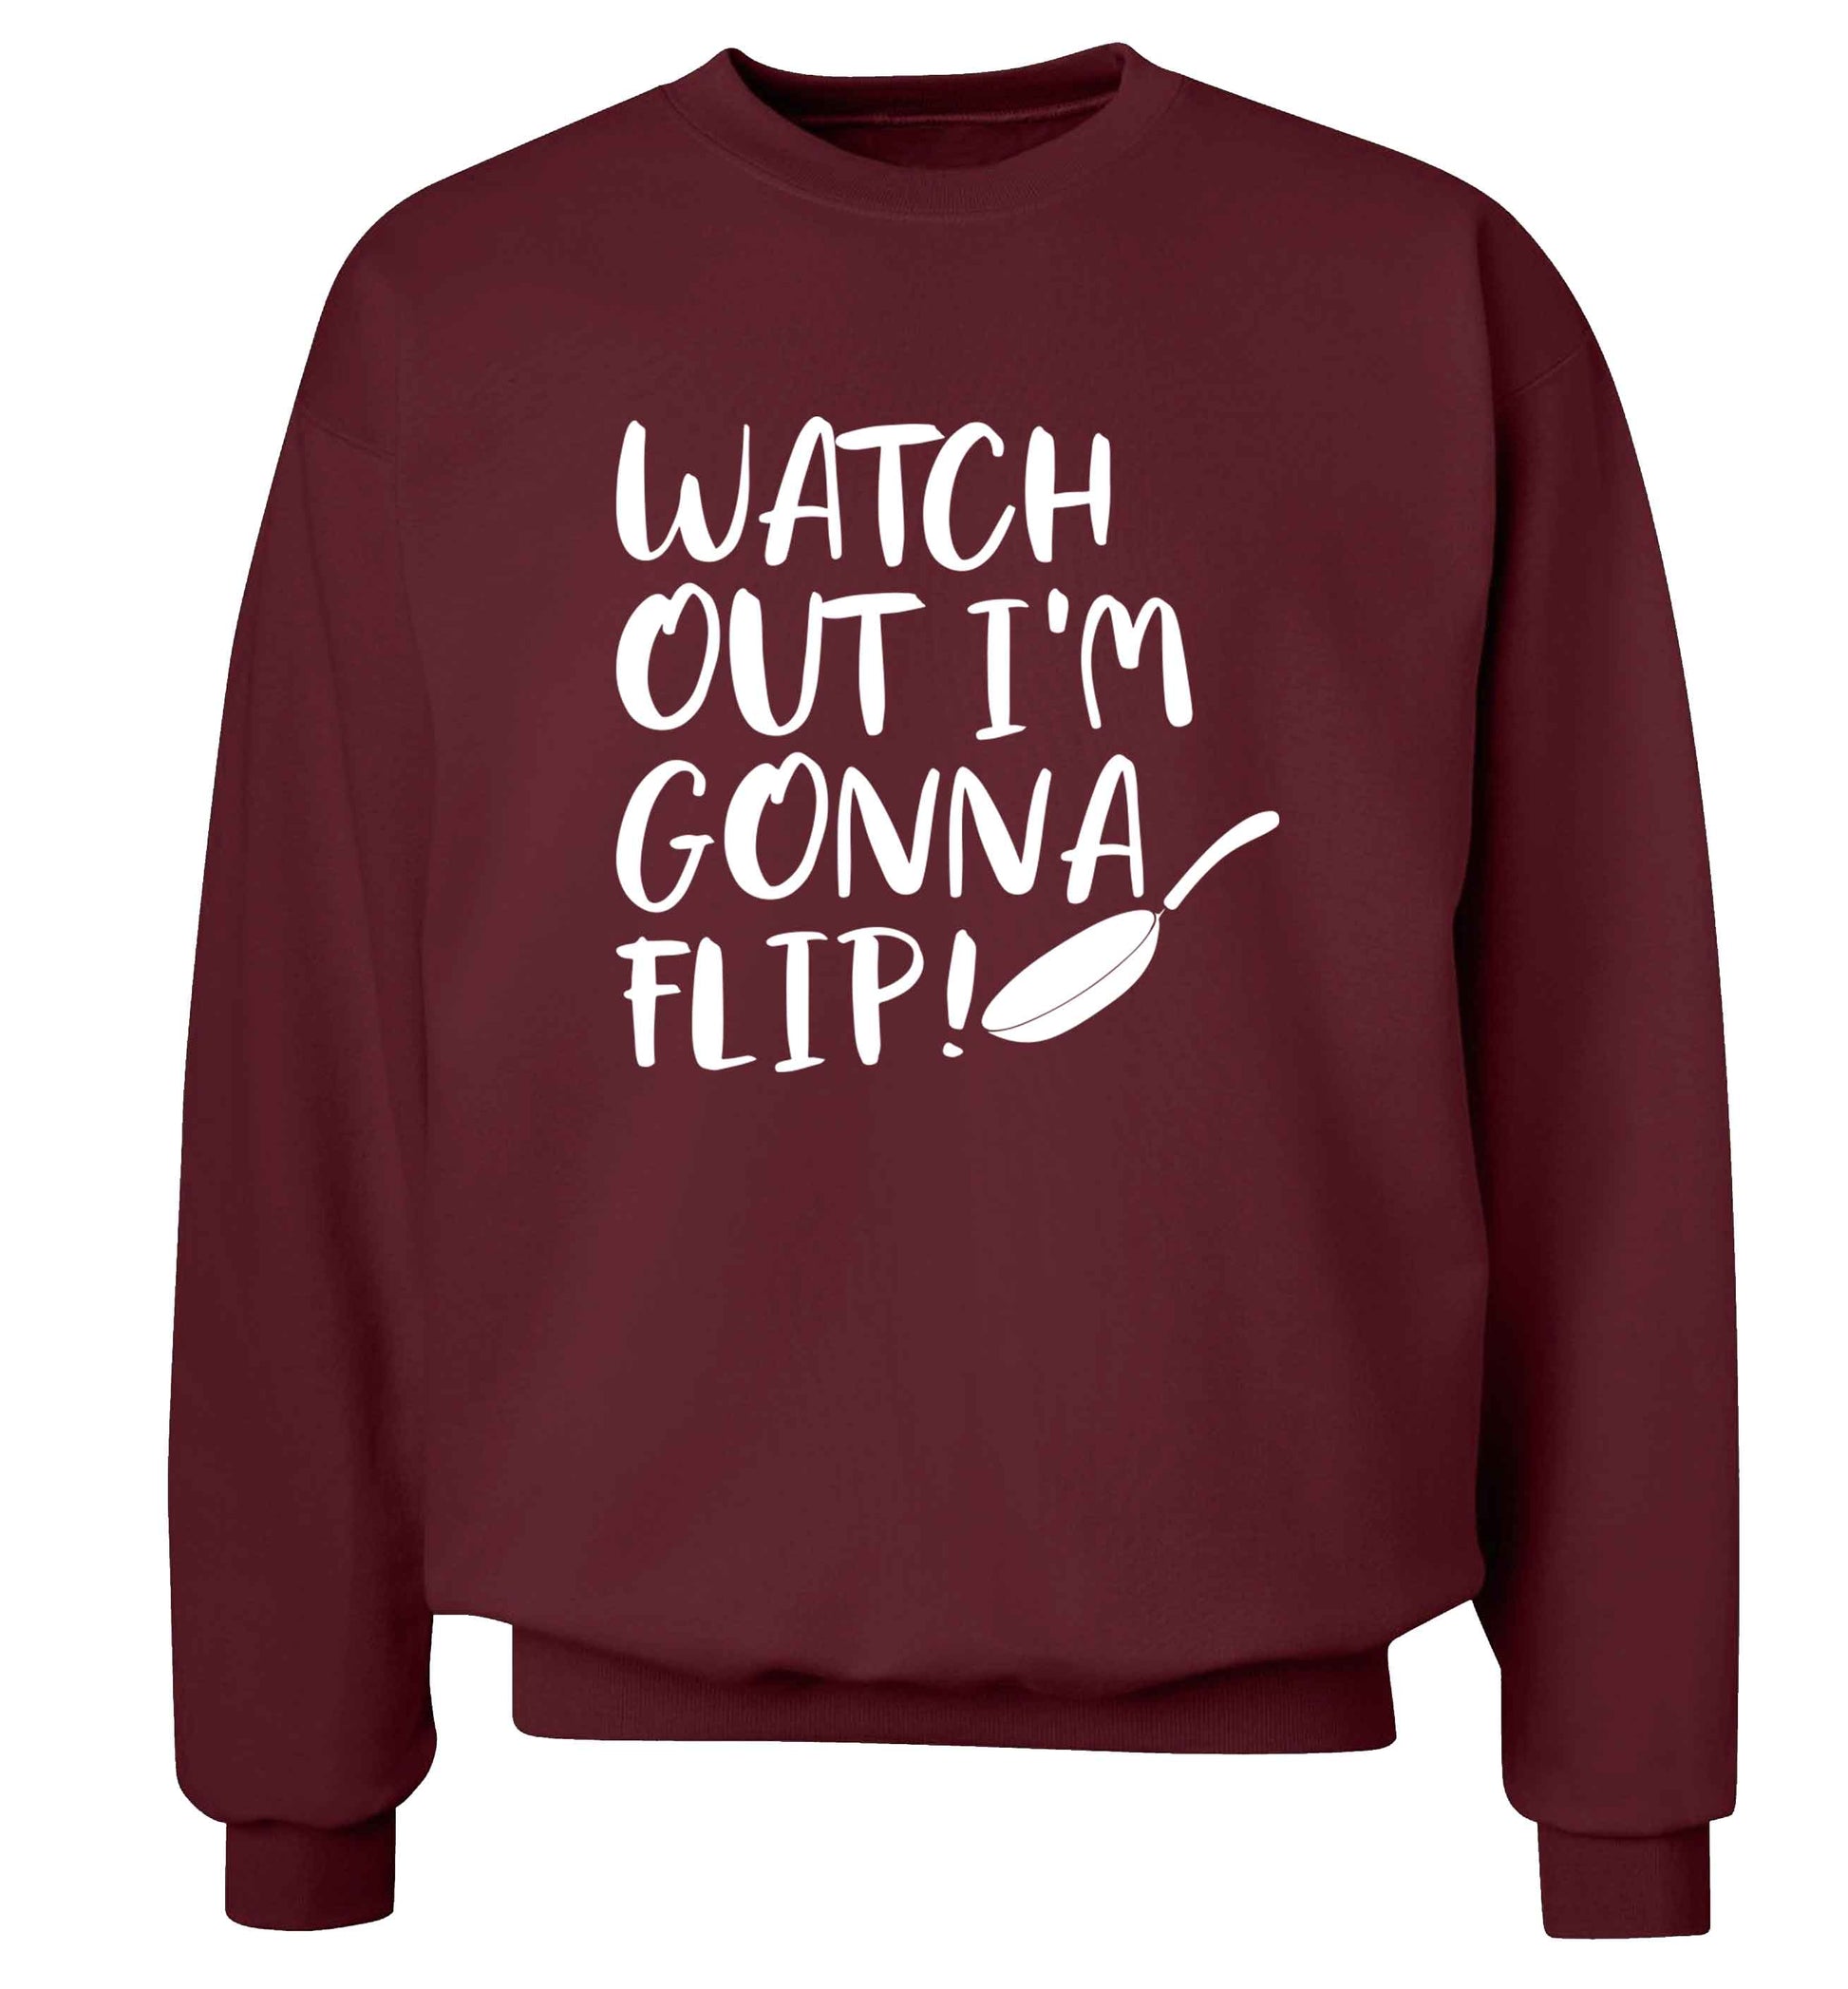 Watch out I'm gonna flip! adult's unisex maroon sweater 2XL